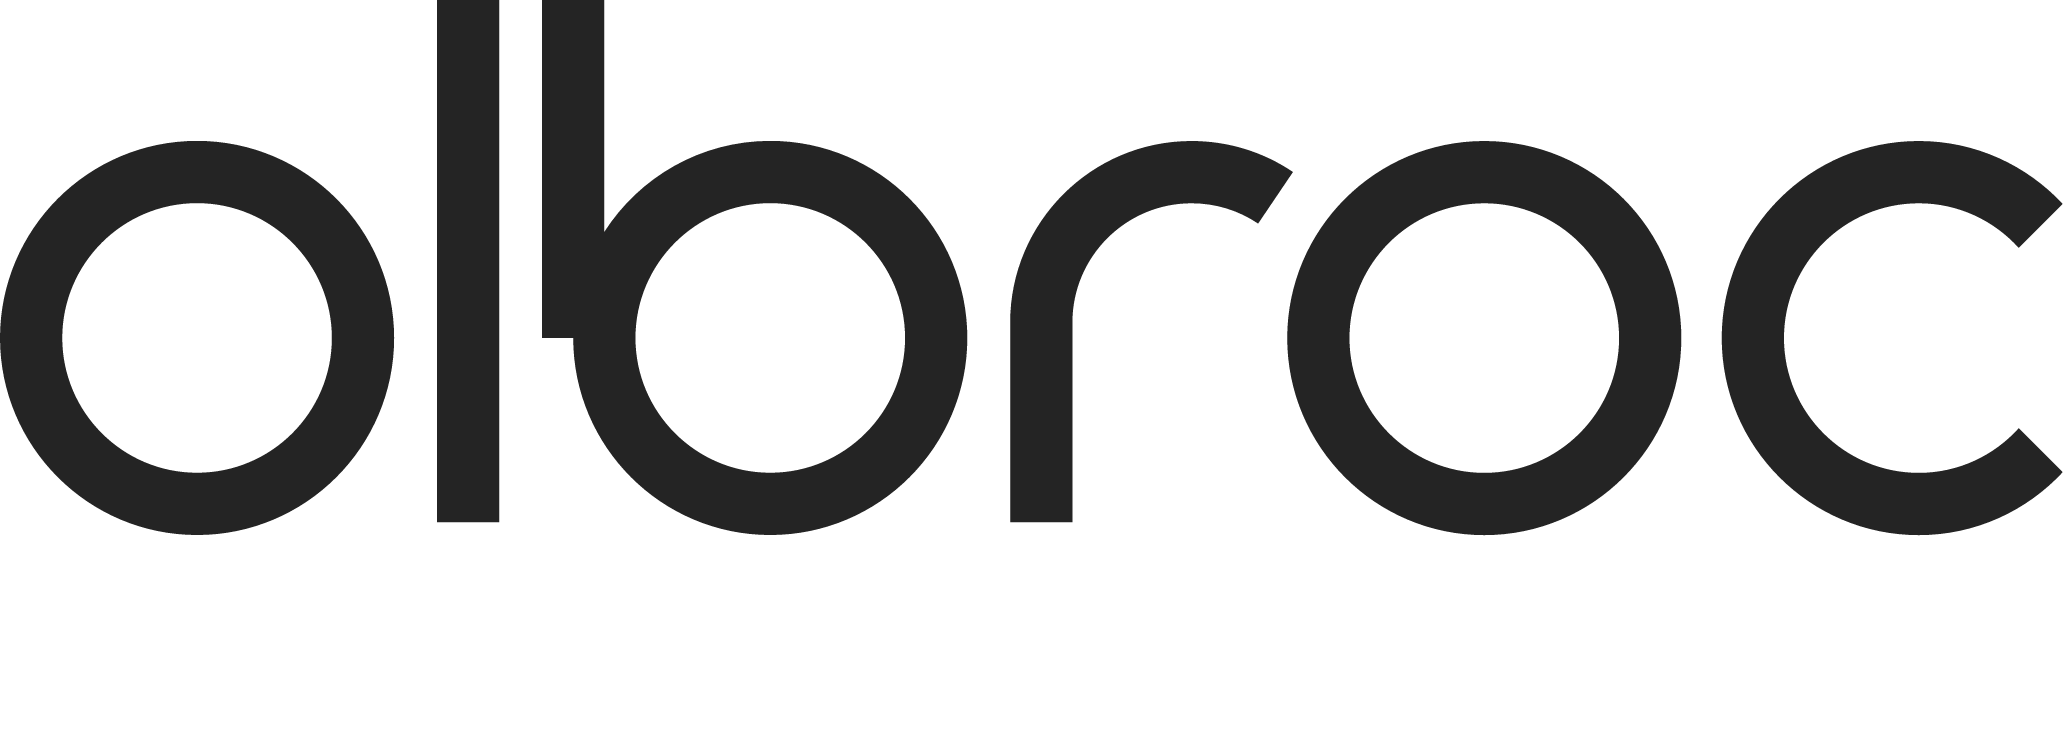 olbroc projects logo